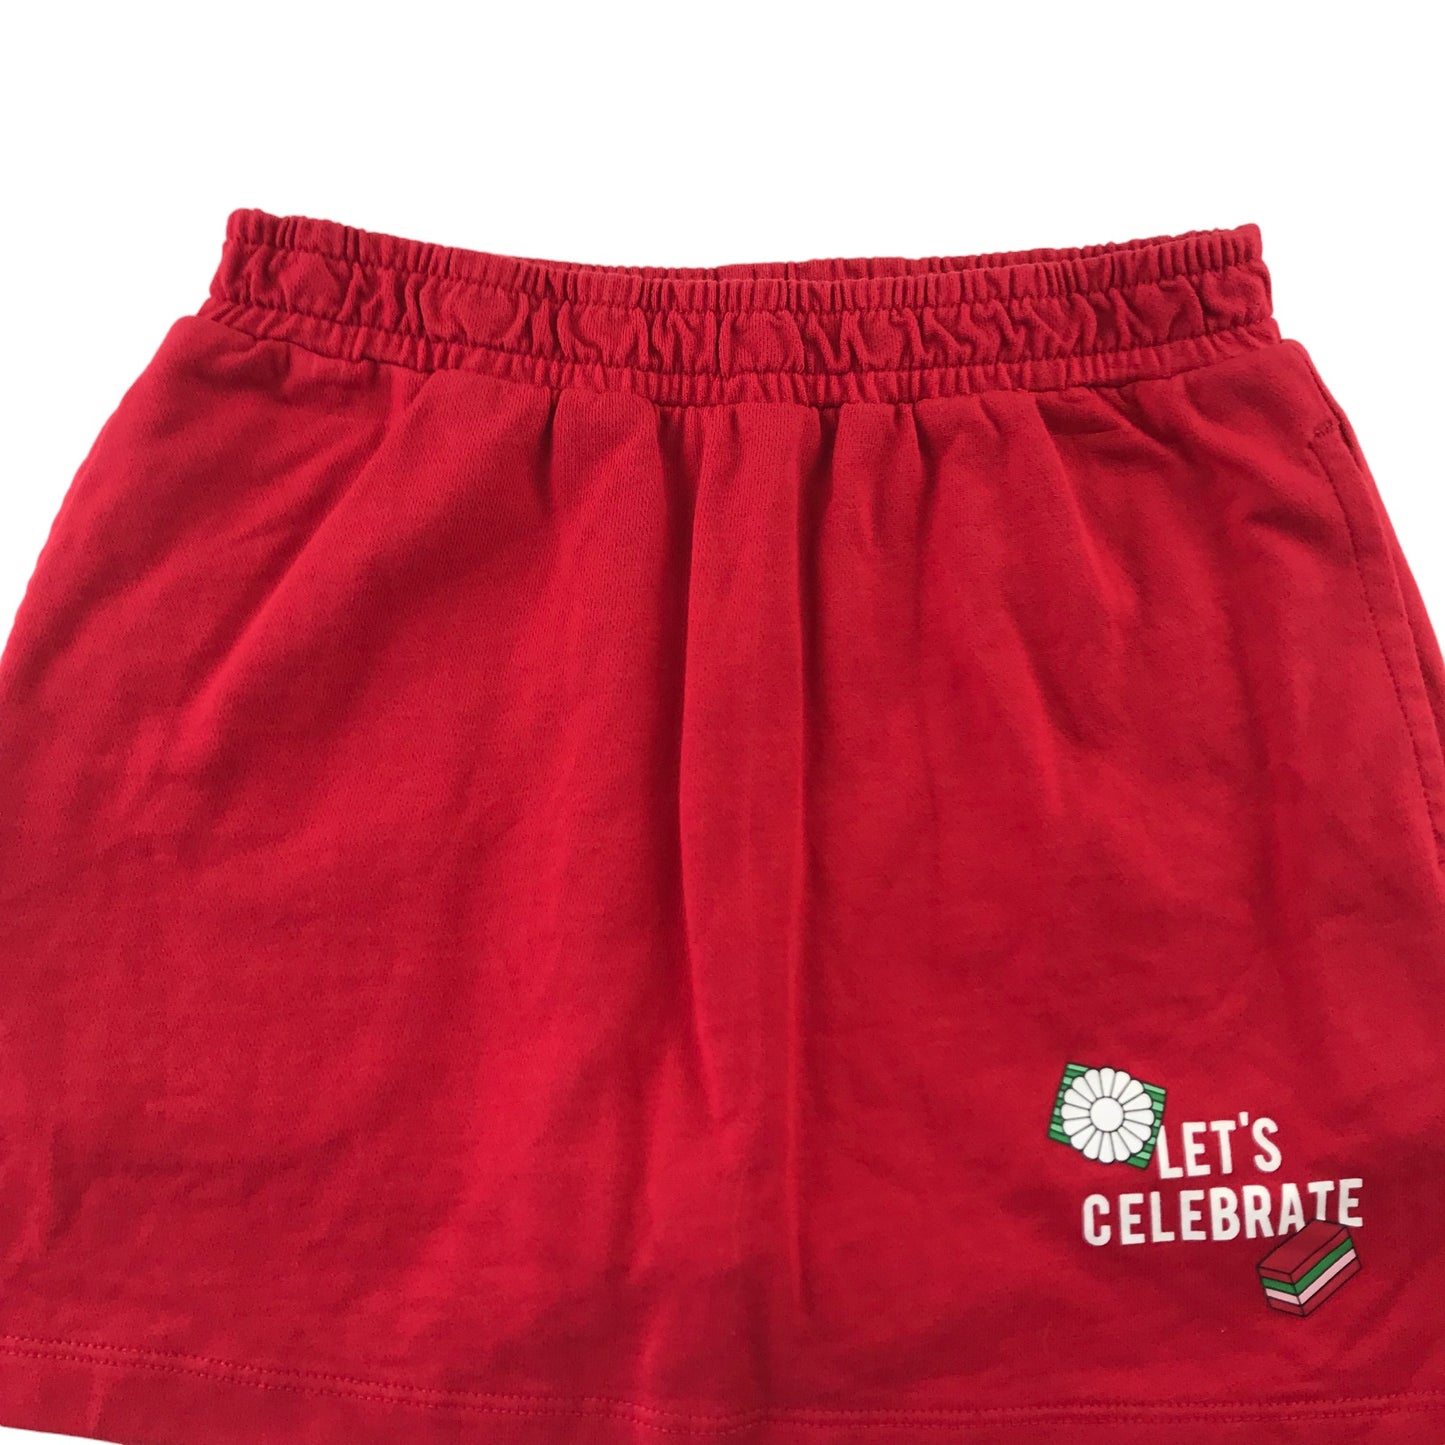 Bossini Skirt Age 6 Red Graphic Design Jersey with under shorts